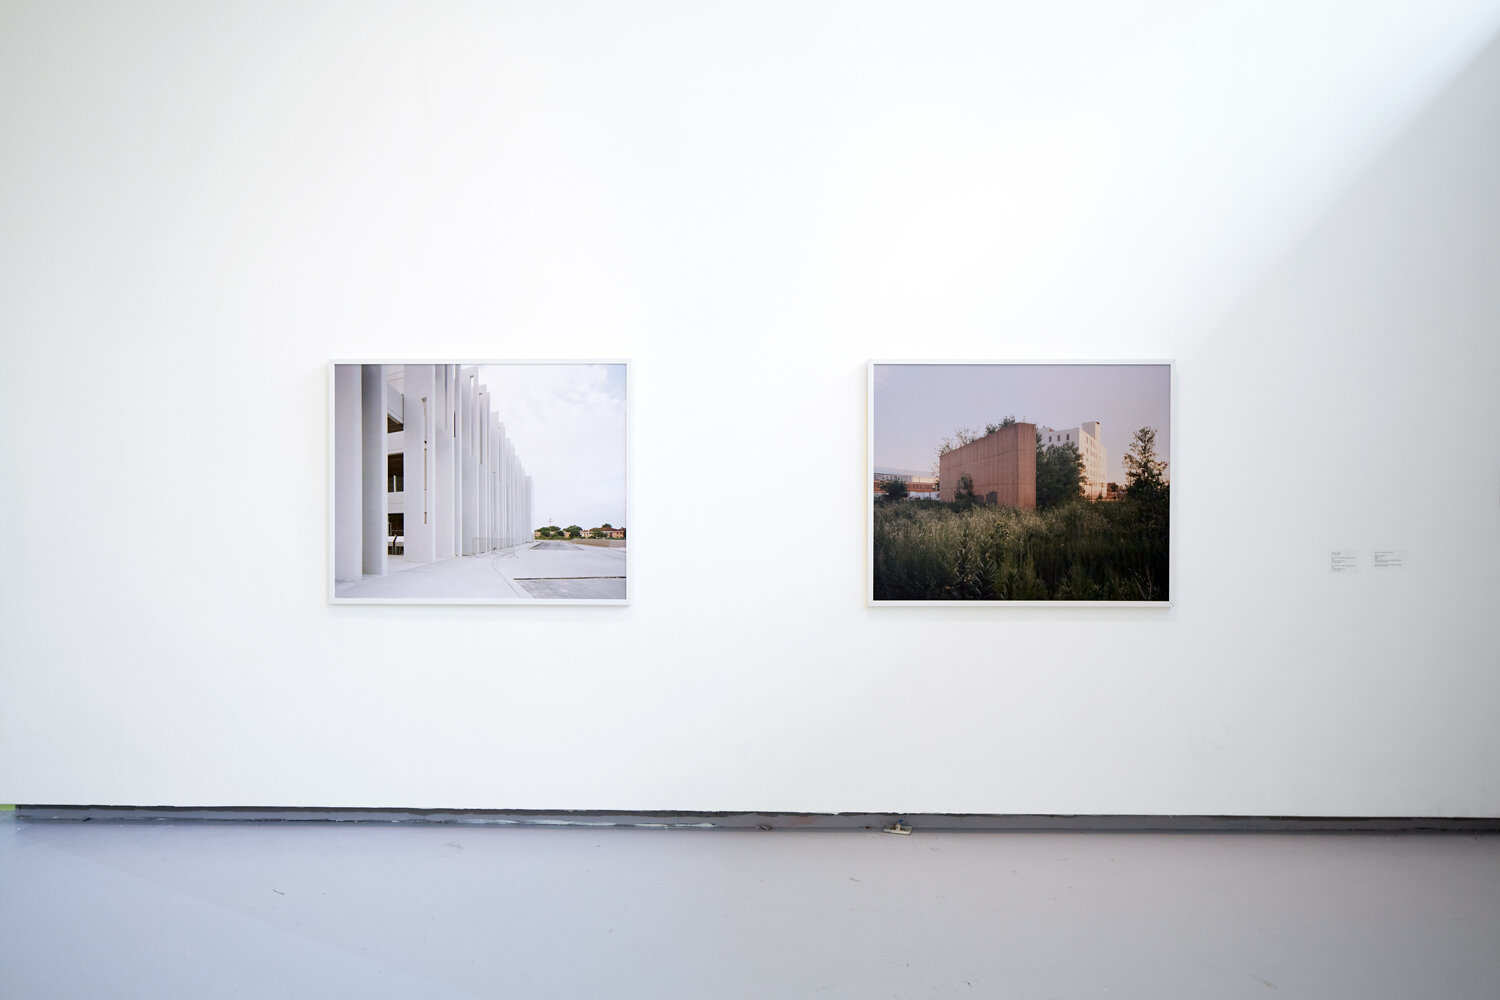 LEFT: No.1281 from series No Man's Land, 40x50 inches; RIGHT: No.1284 from series No Man's Land, 40x50 inches